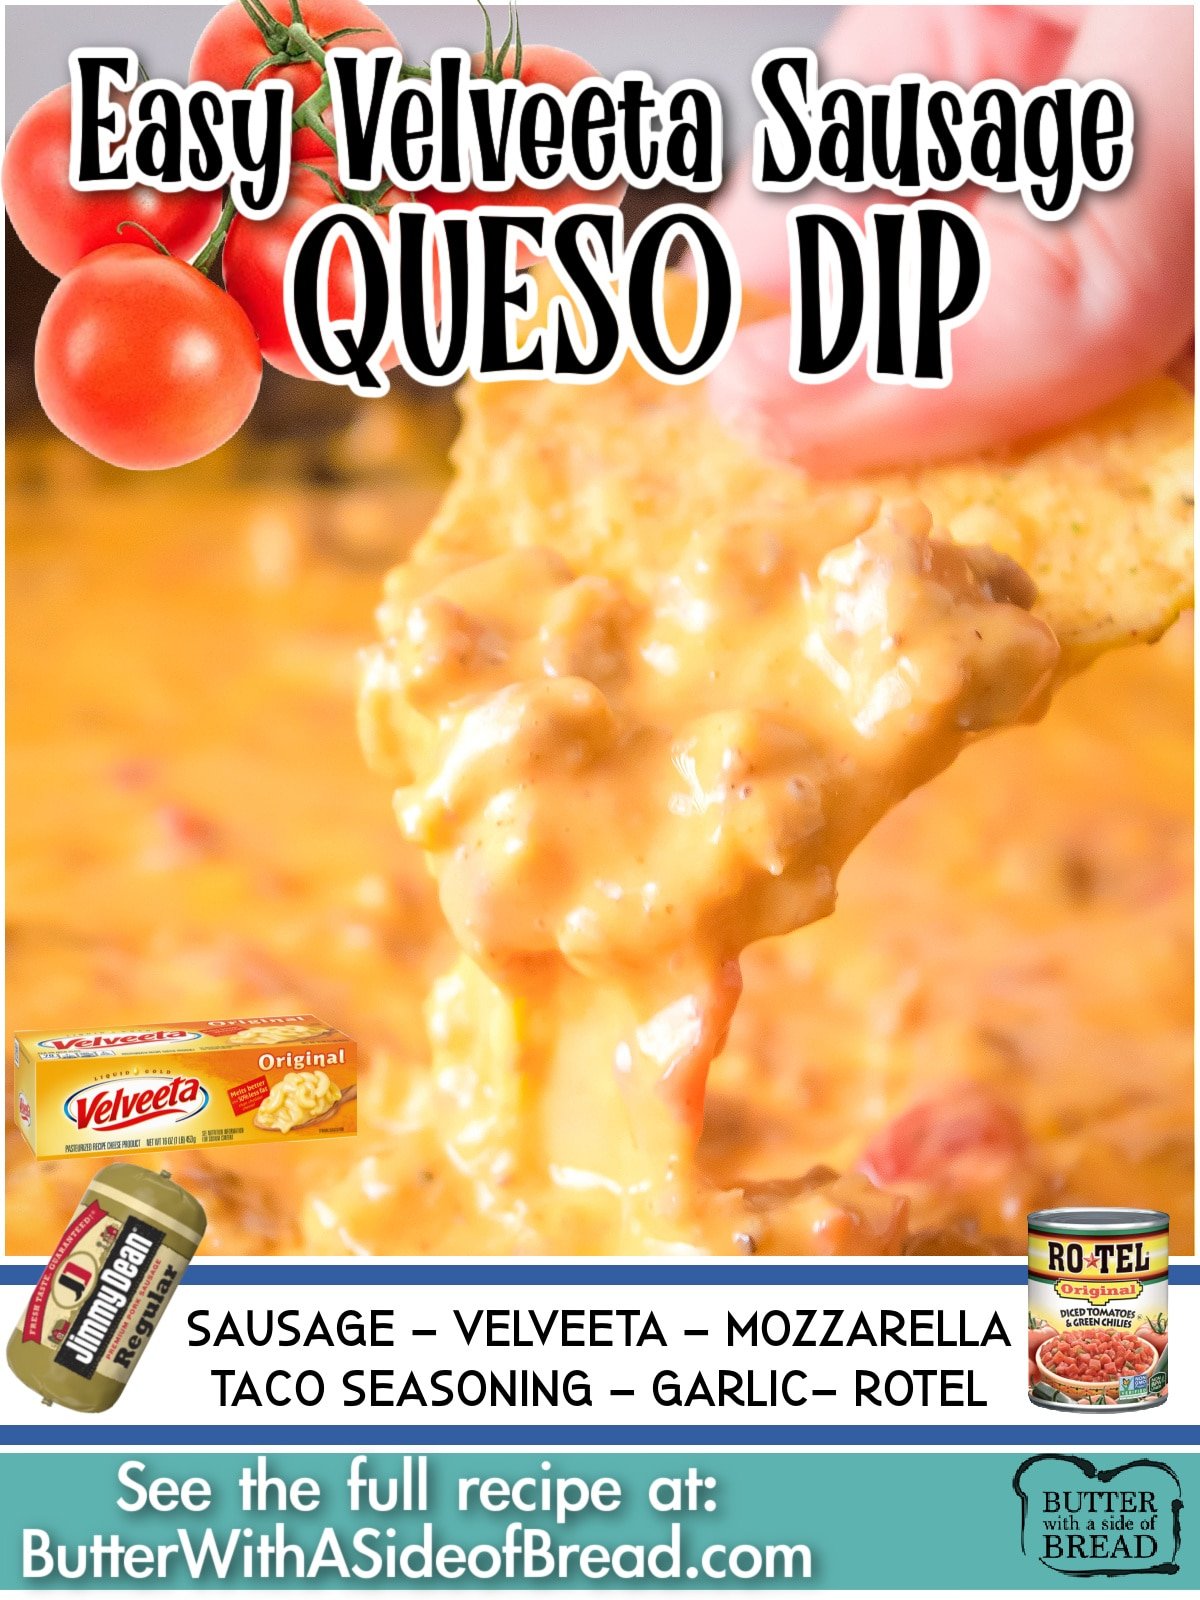 Velveeta Sausage Queso Dip is an easy appetizer recipe perfect for game day! Flavorful sausage with creamy cheese & a kick of spice; our Queso Dip Recipe has got it all!